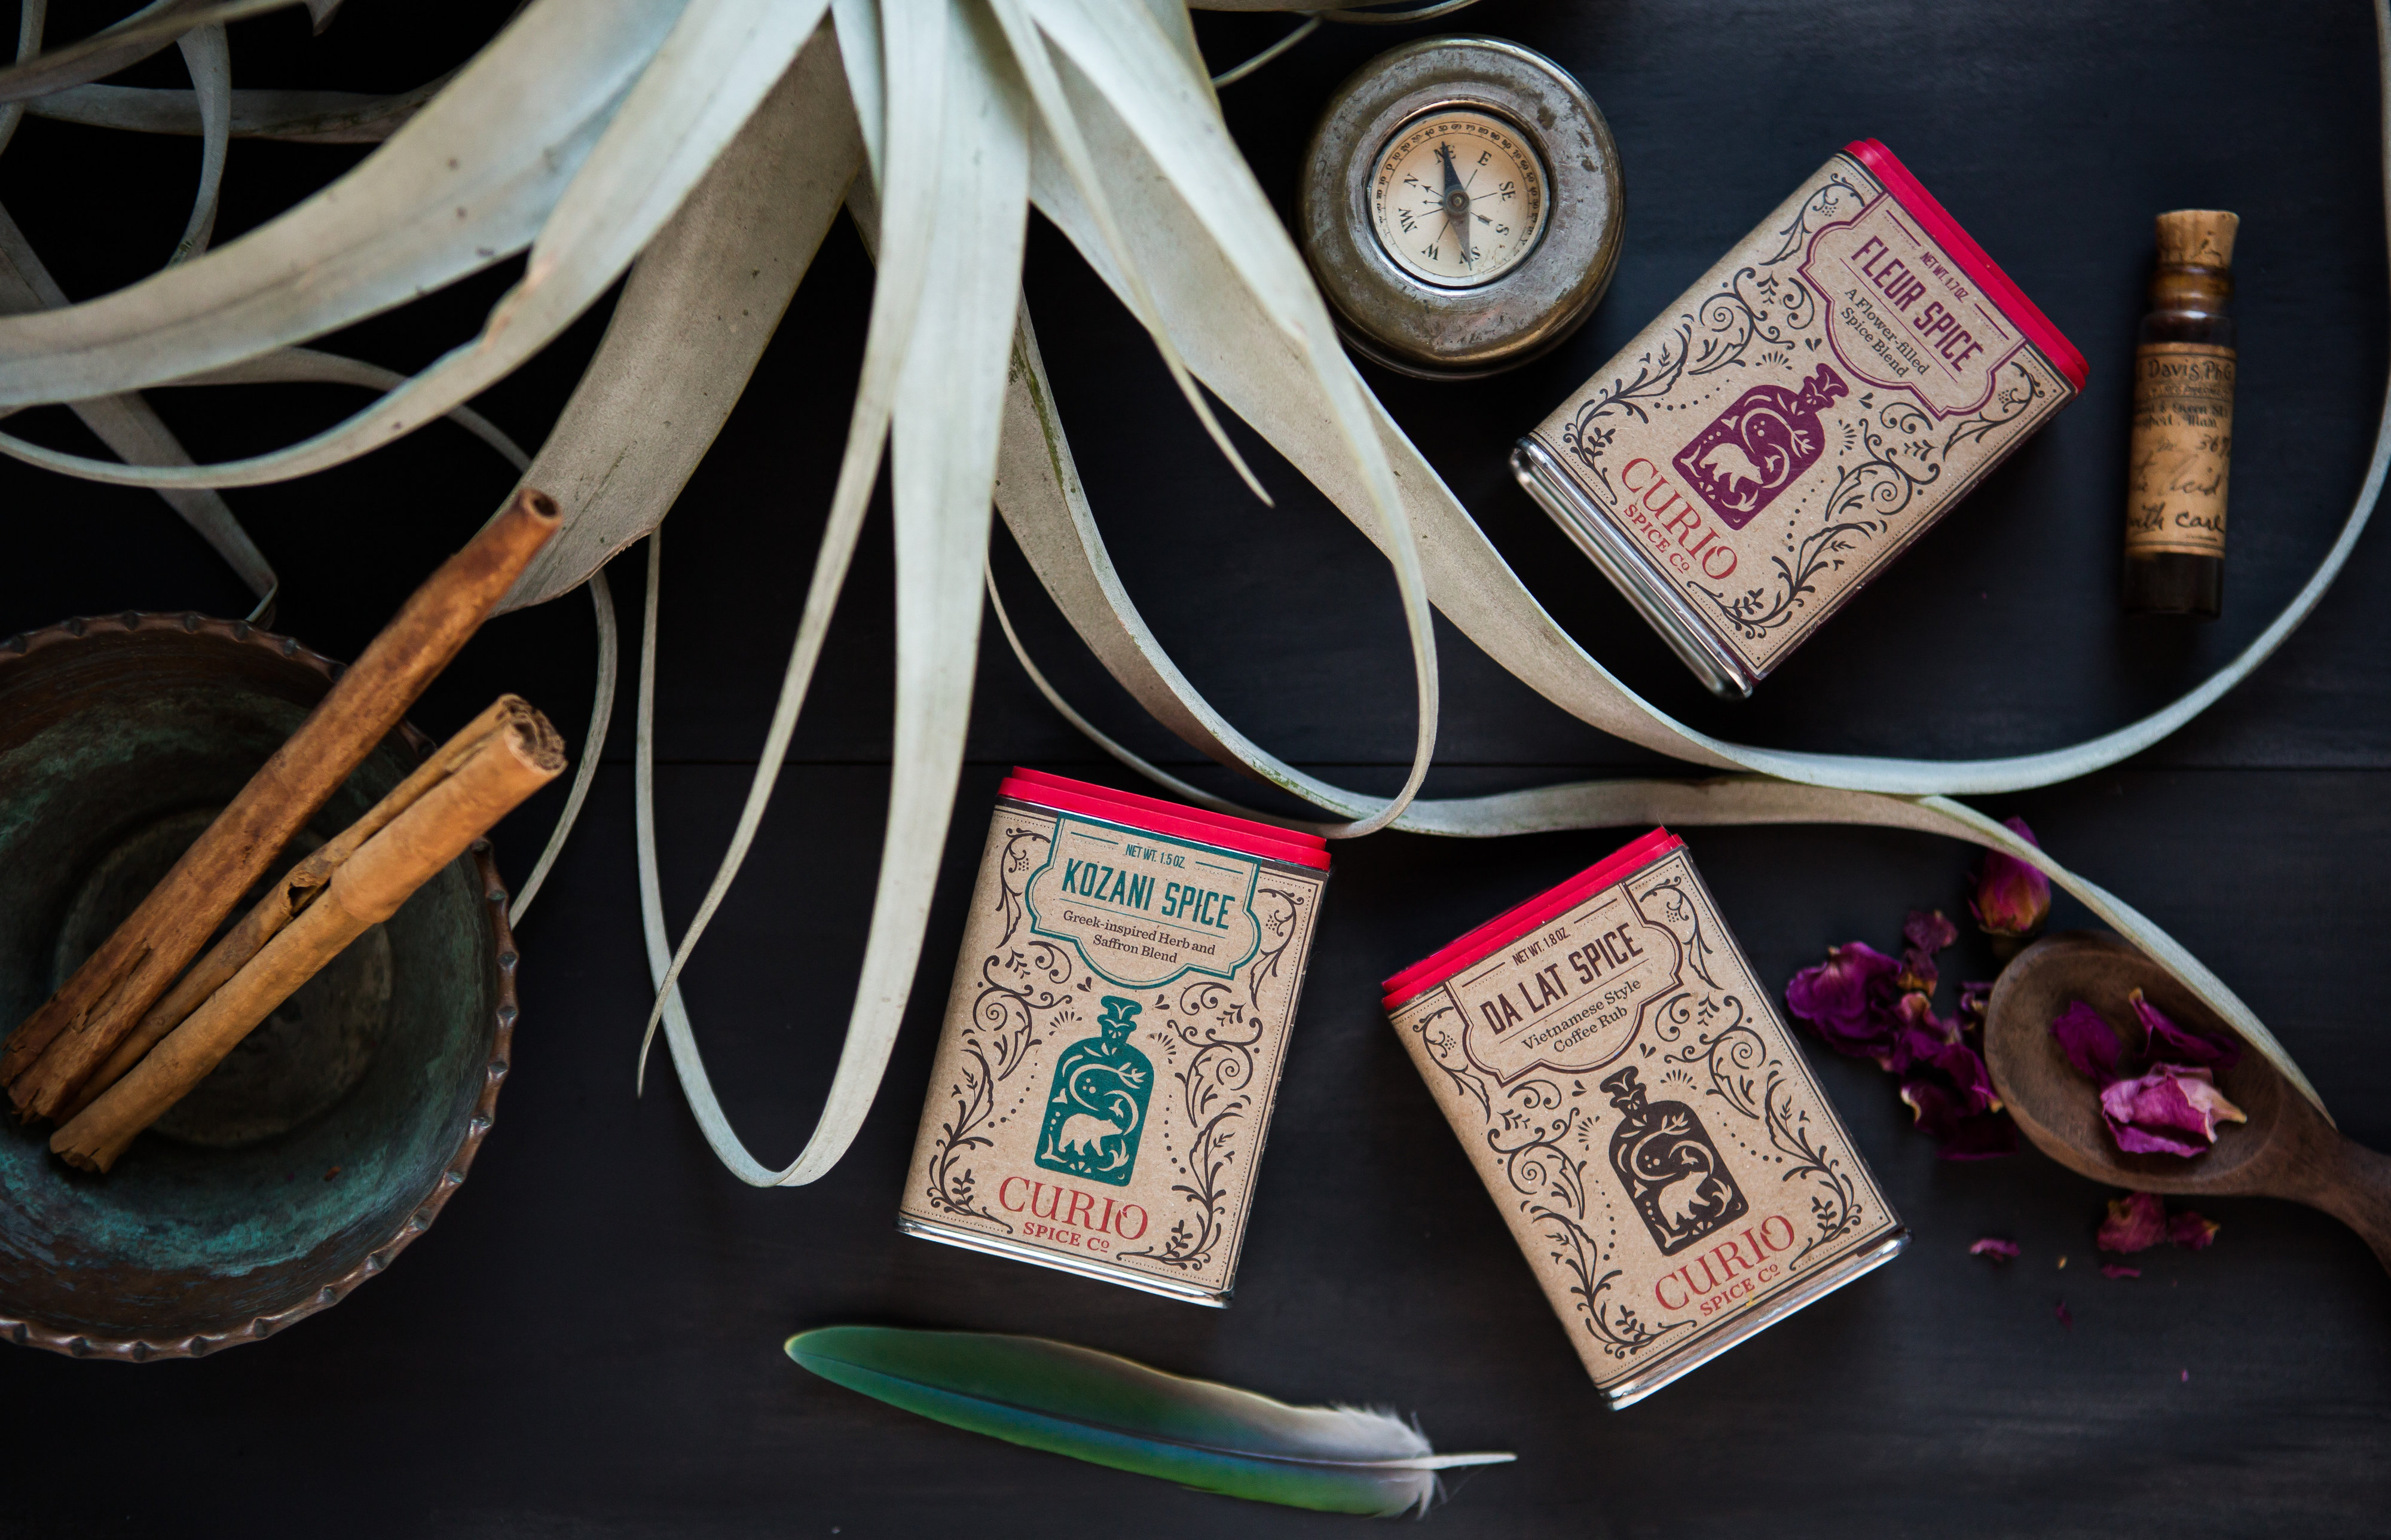 Curio's unique spice blends in vintage tins inspired by the founder's travel around the world.